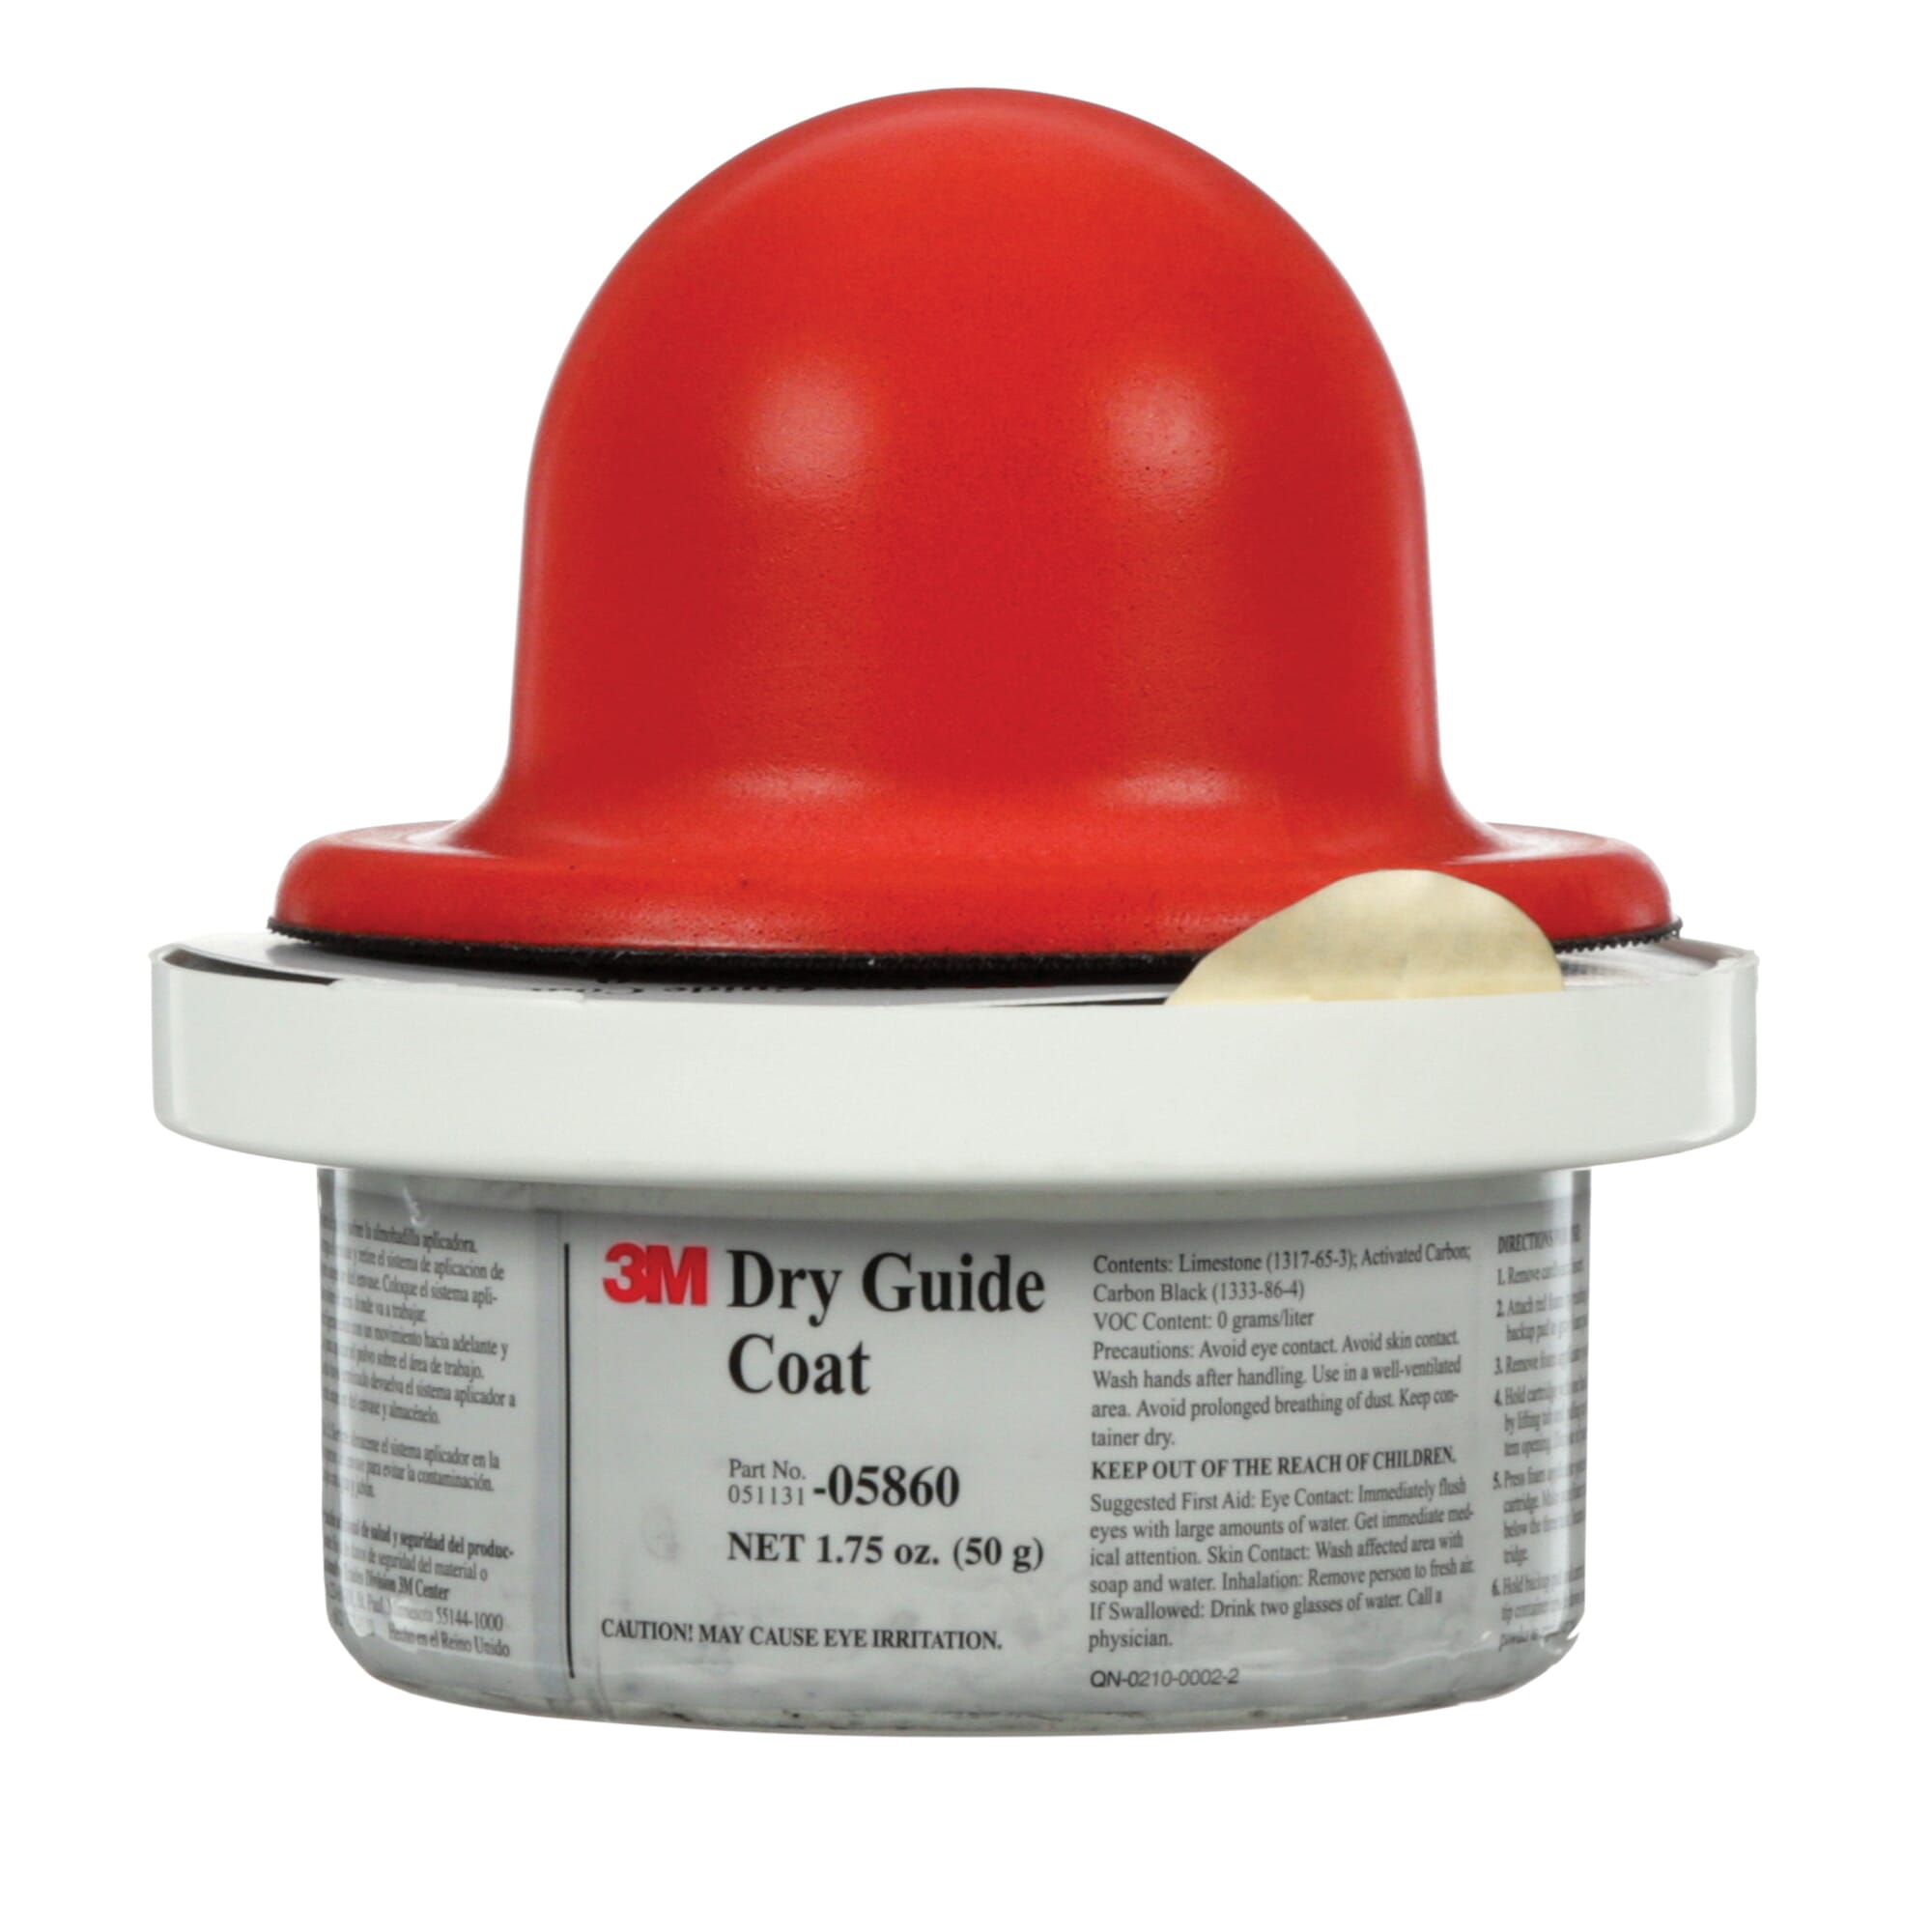 3M 7000000597 Dry Guide Coat Kit, 50 g Container, Powder Form, Dark Gray